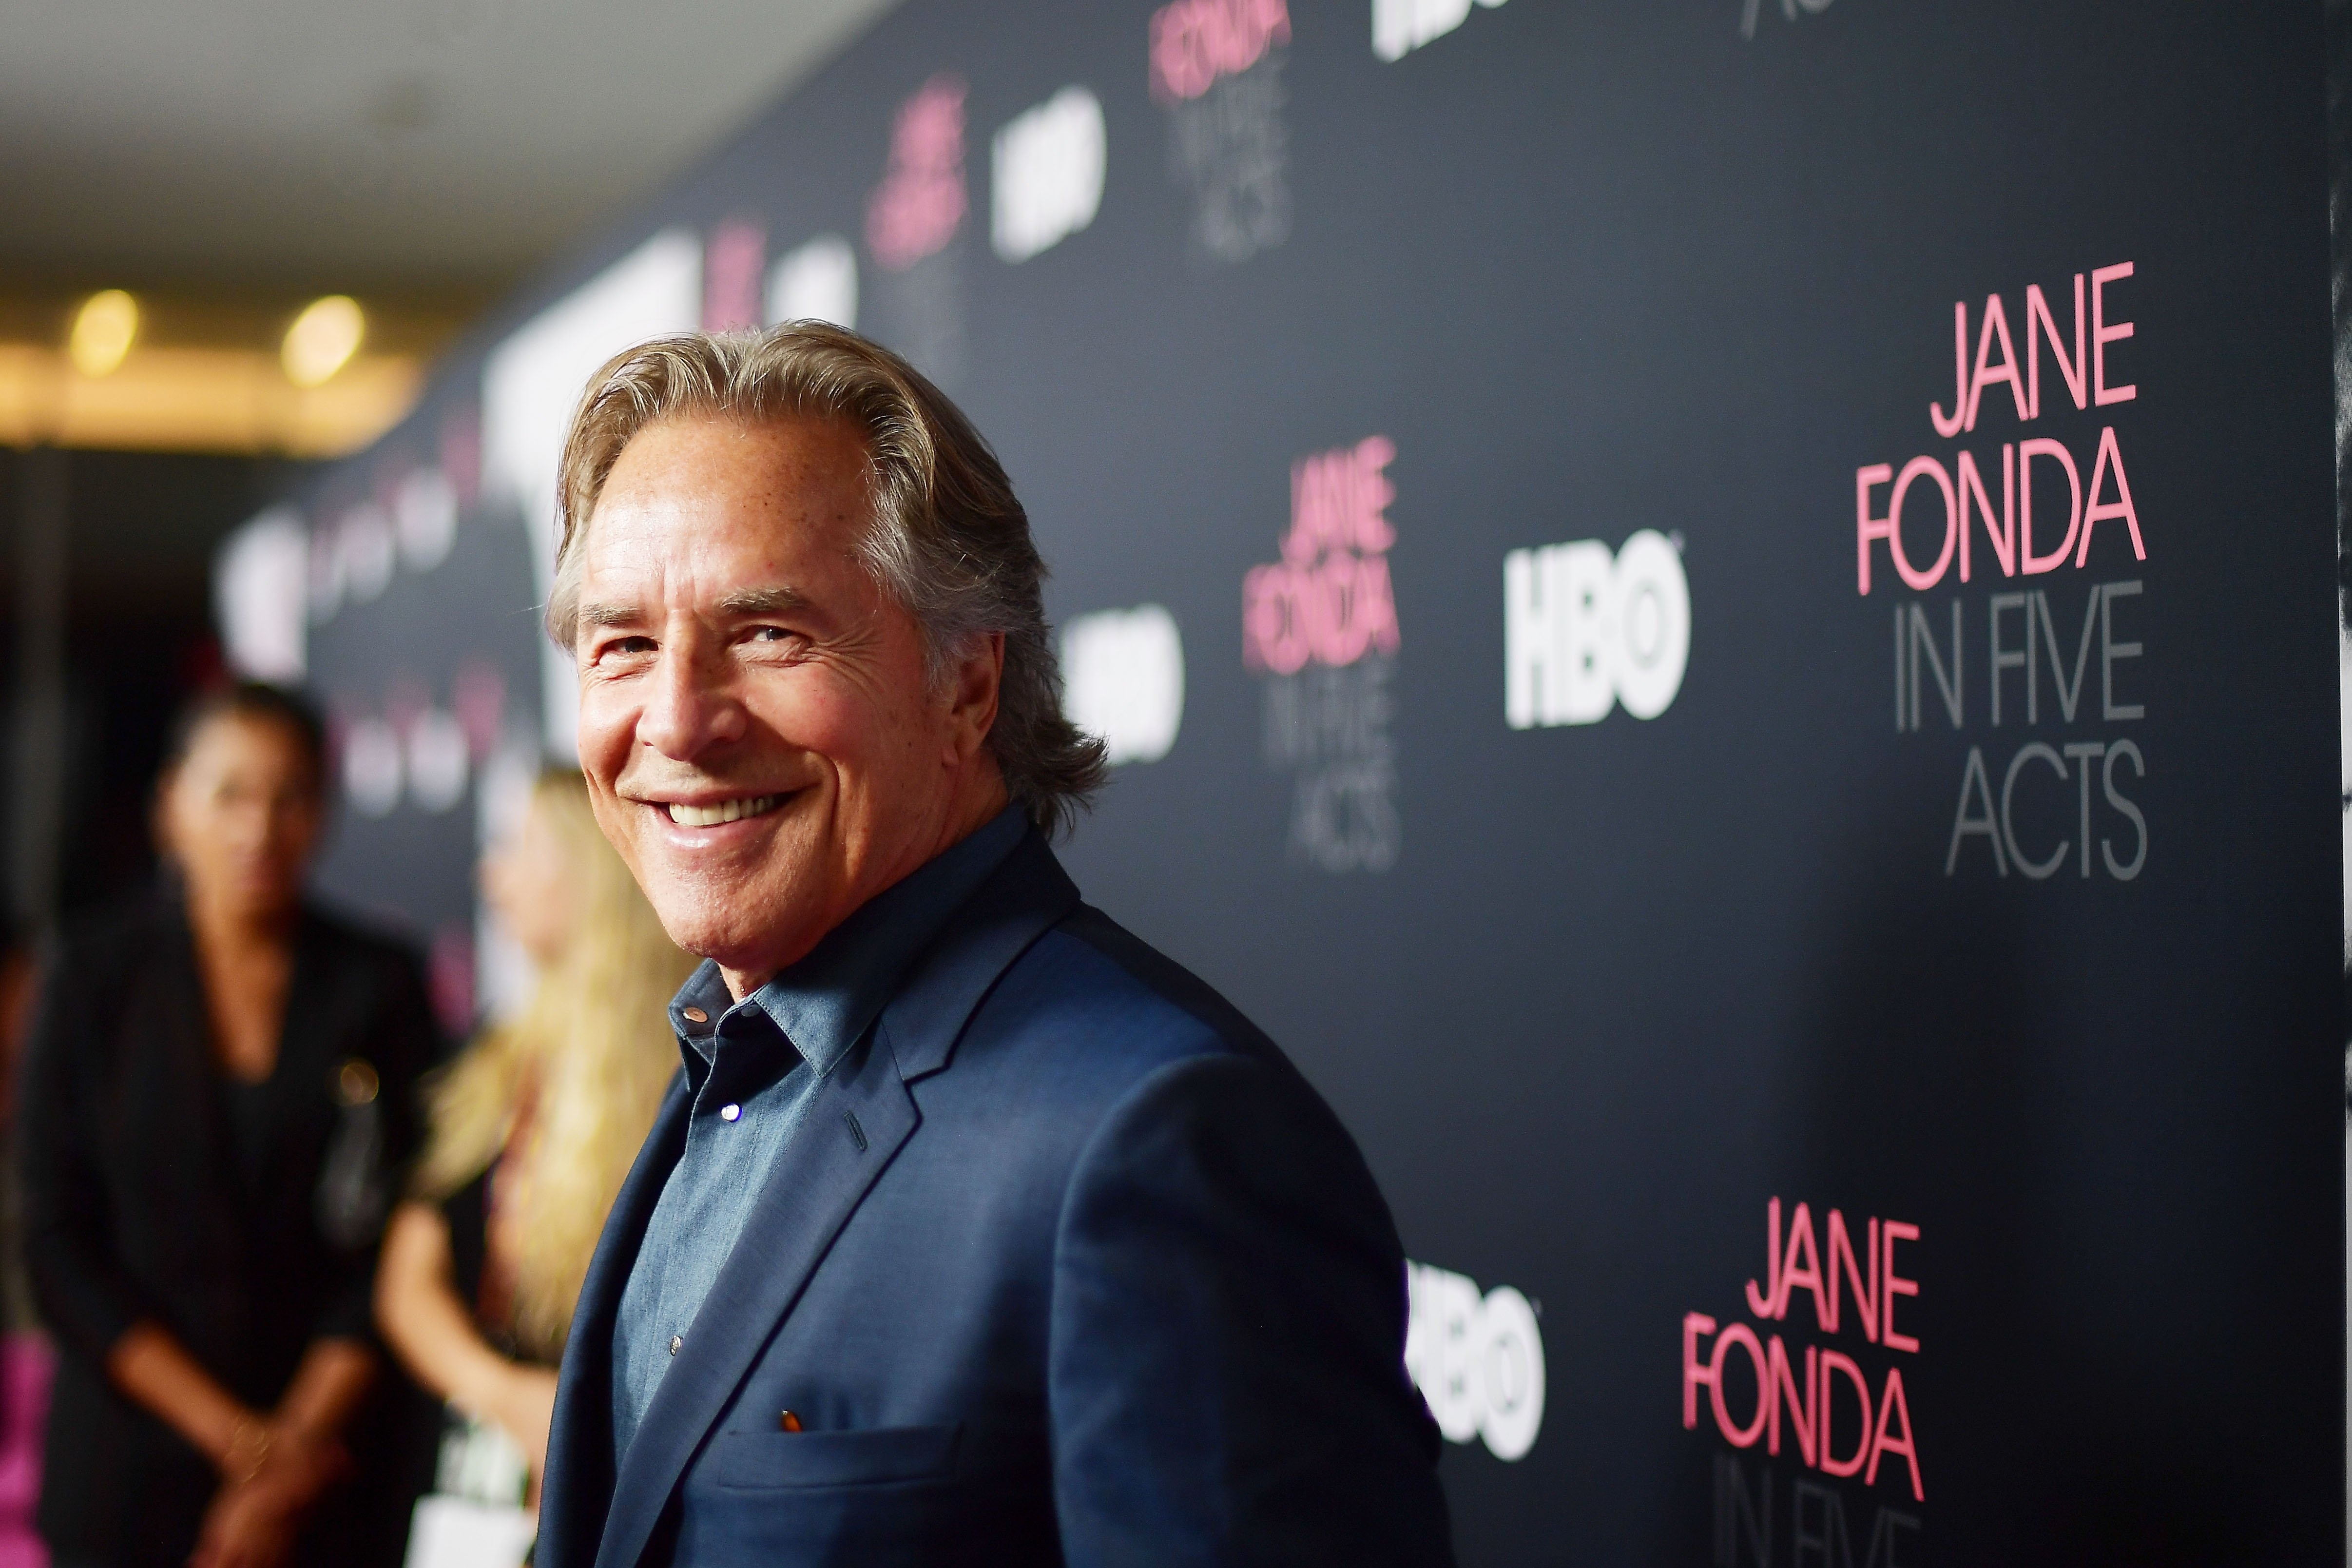 Don Johnson attends the premiere of HBO's "Jane Fonda In Five Acts in July 2019 | Photo: Getty Images